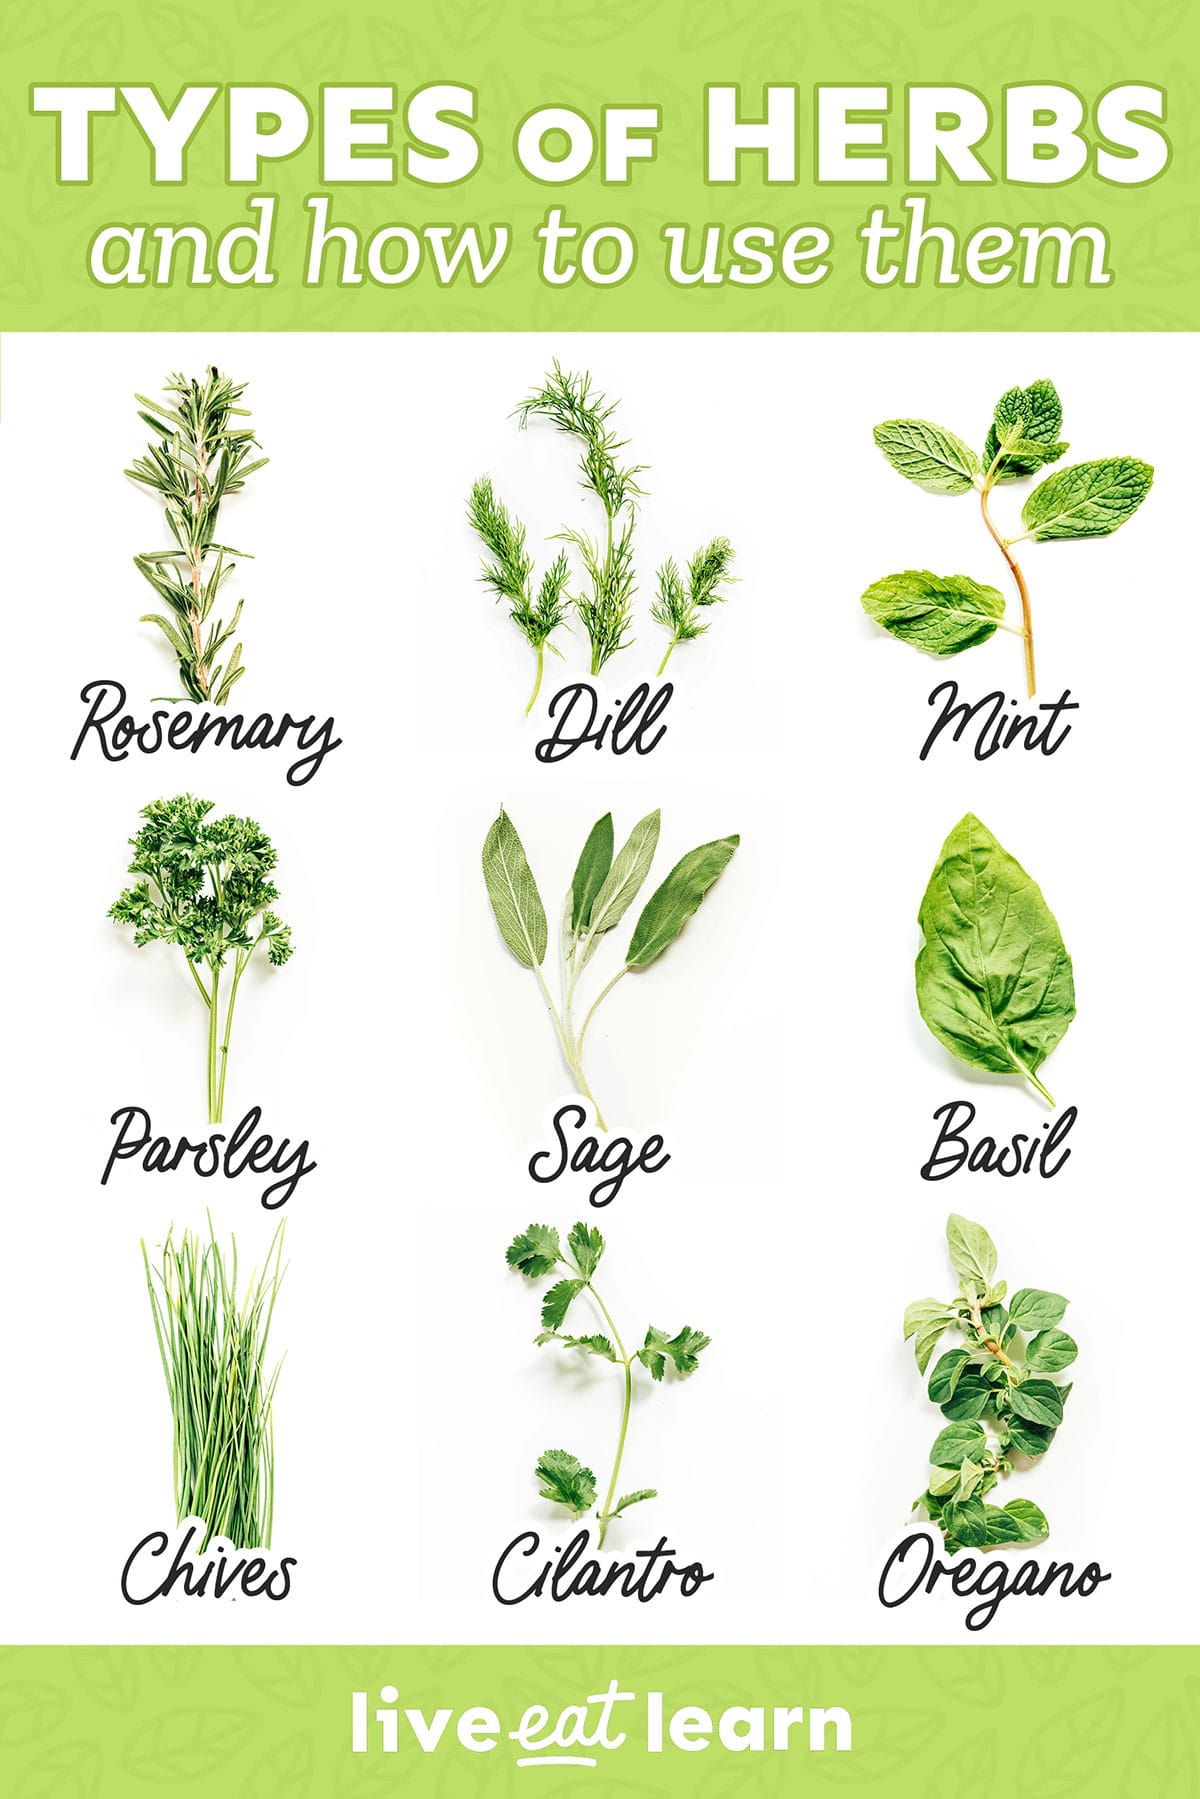 How To Harvest Herbs